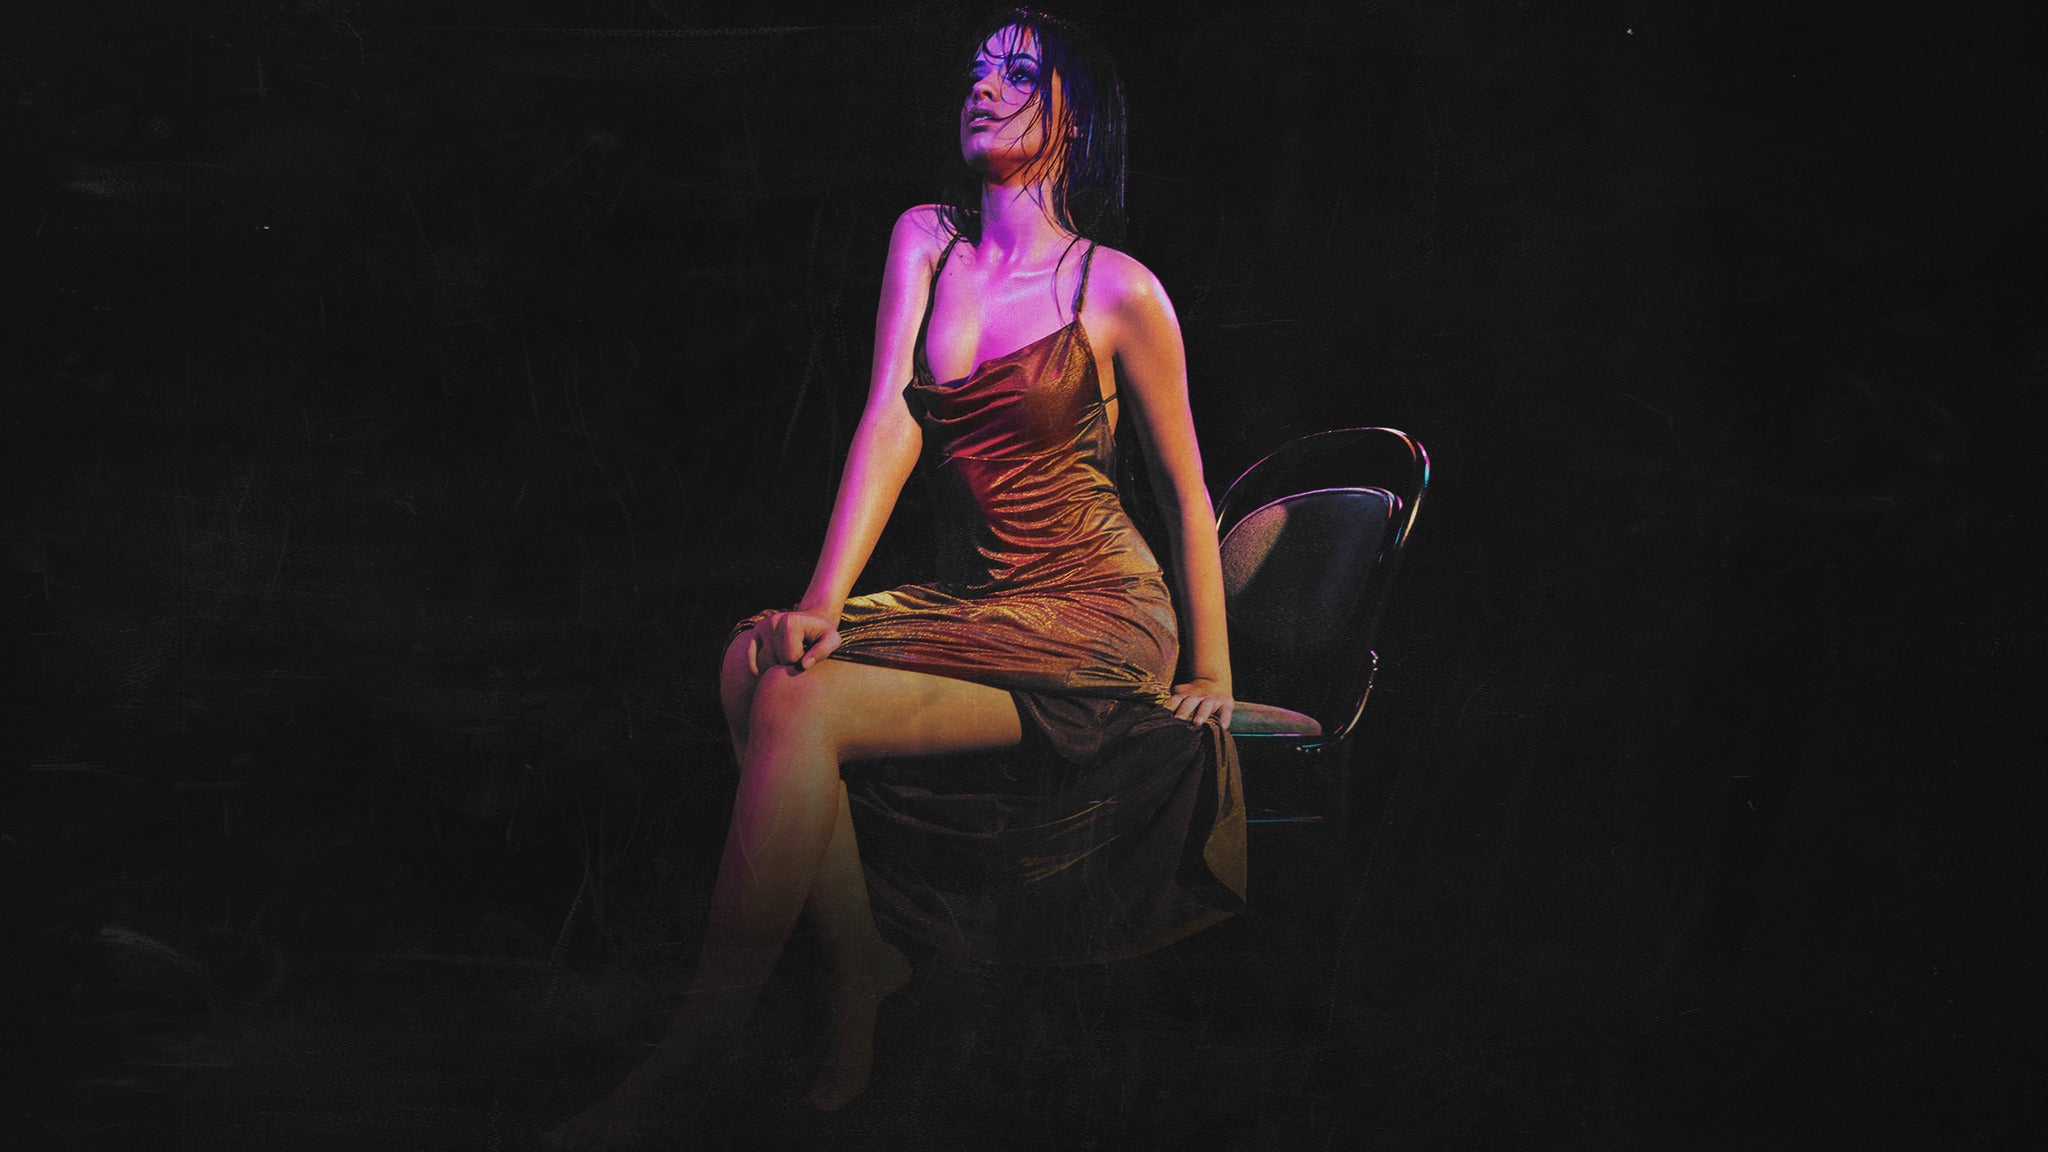 Camila Cabello: The Romance Tour presented by Mastercard in Sacramento promo photo for Verified Fan VIP Package presale offer code